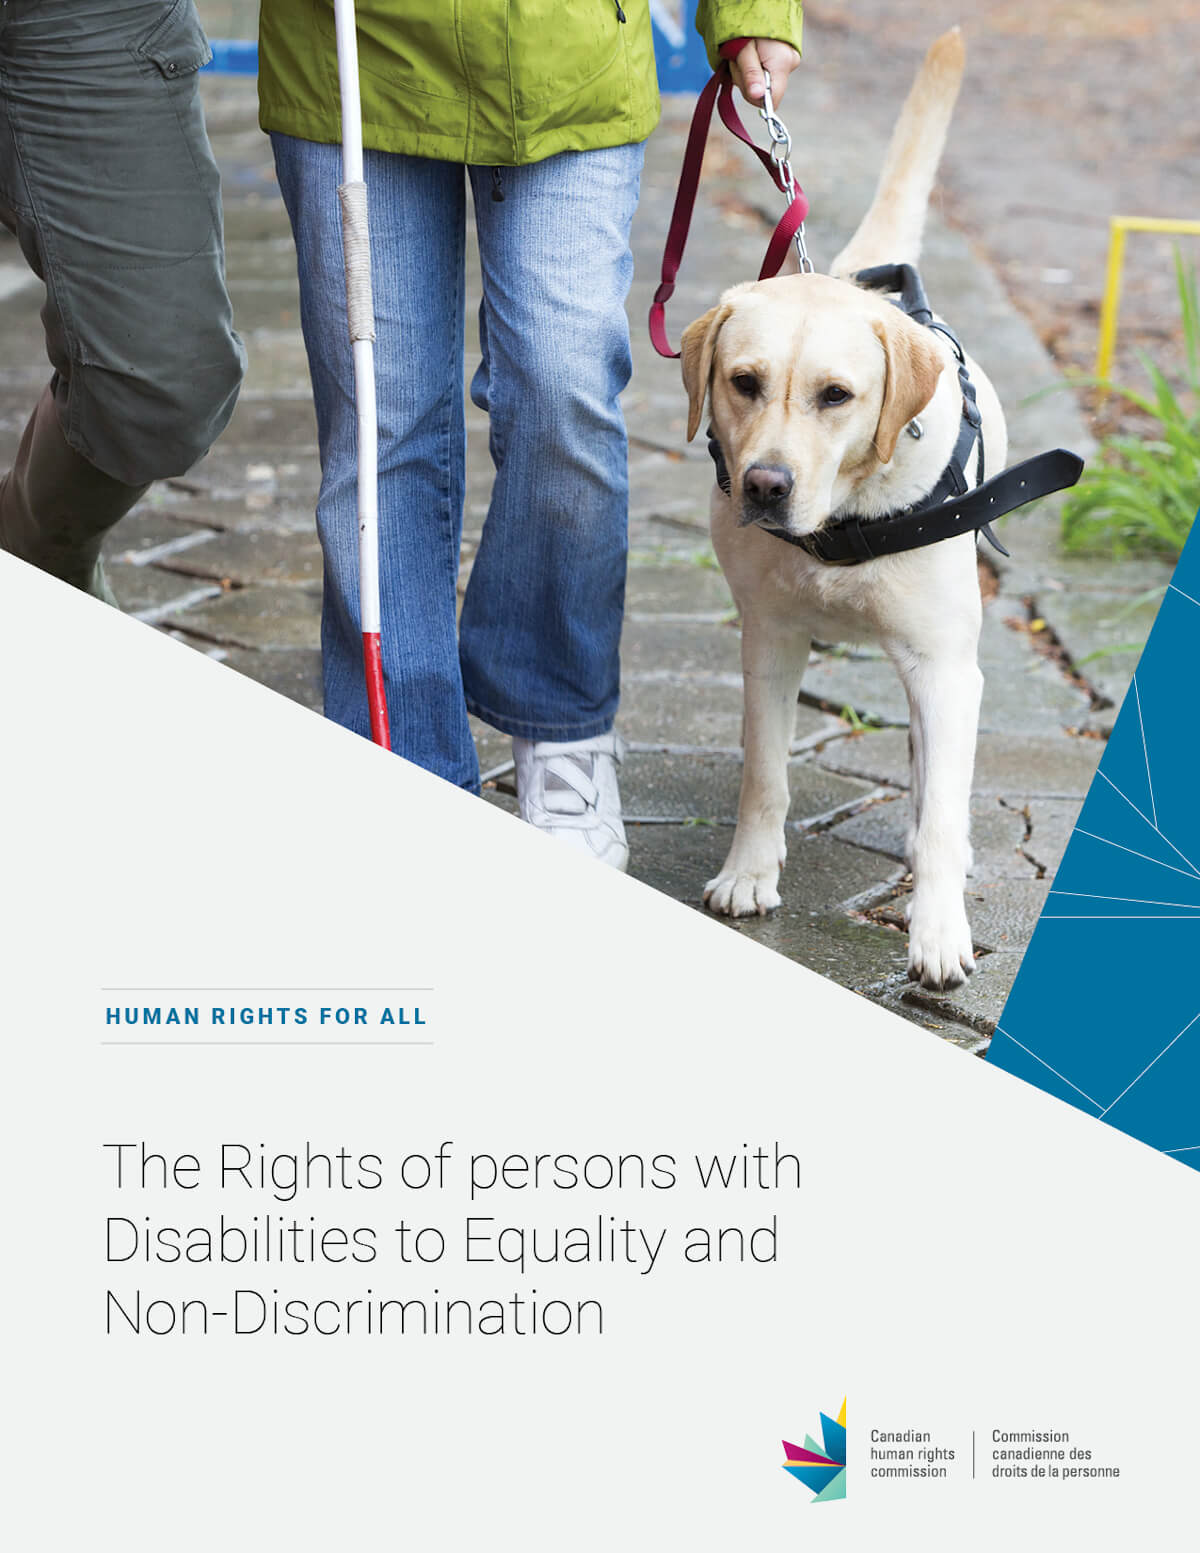 The Rights of Persons with Disabilities to Equality and Non-Discrimination